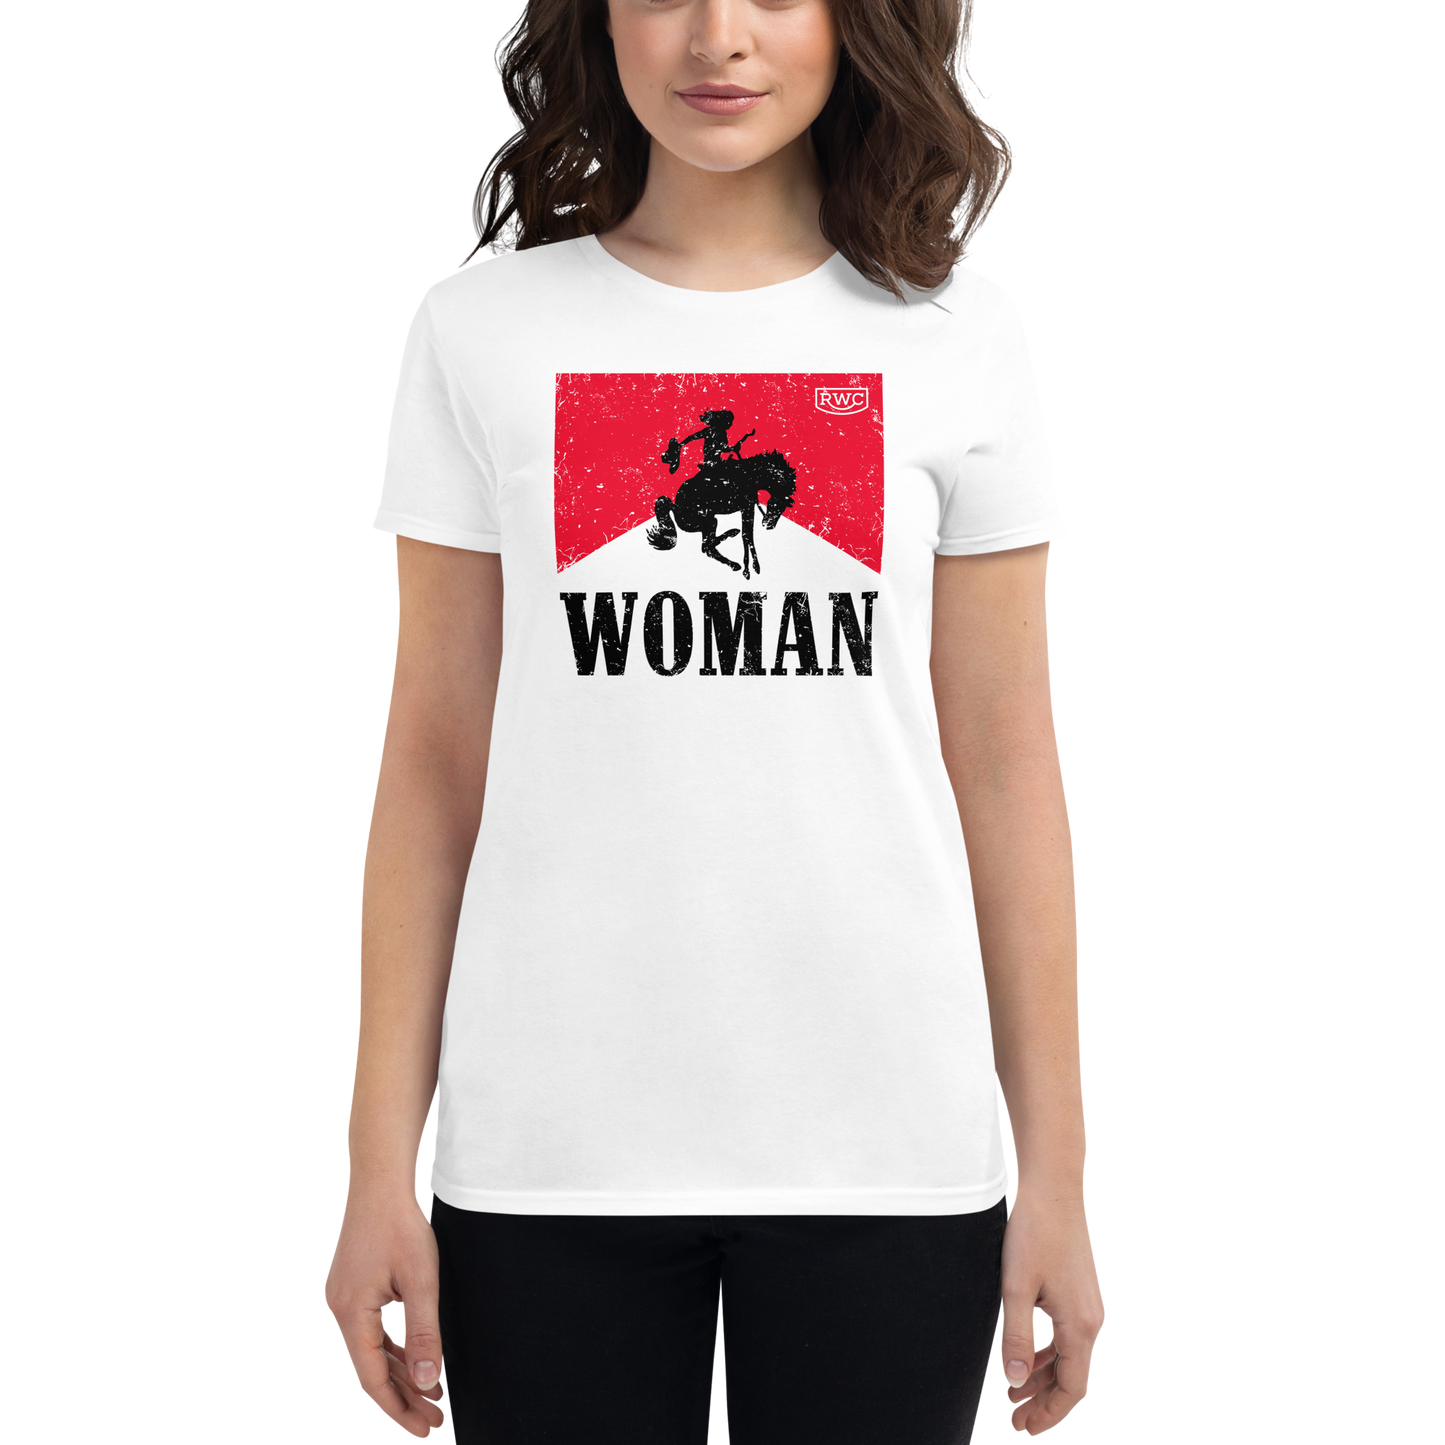 WOMAN [REDS]